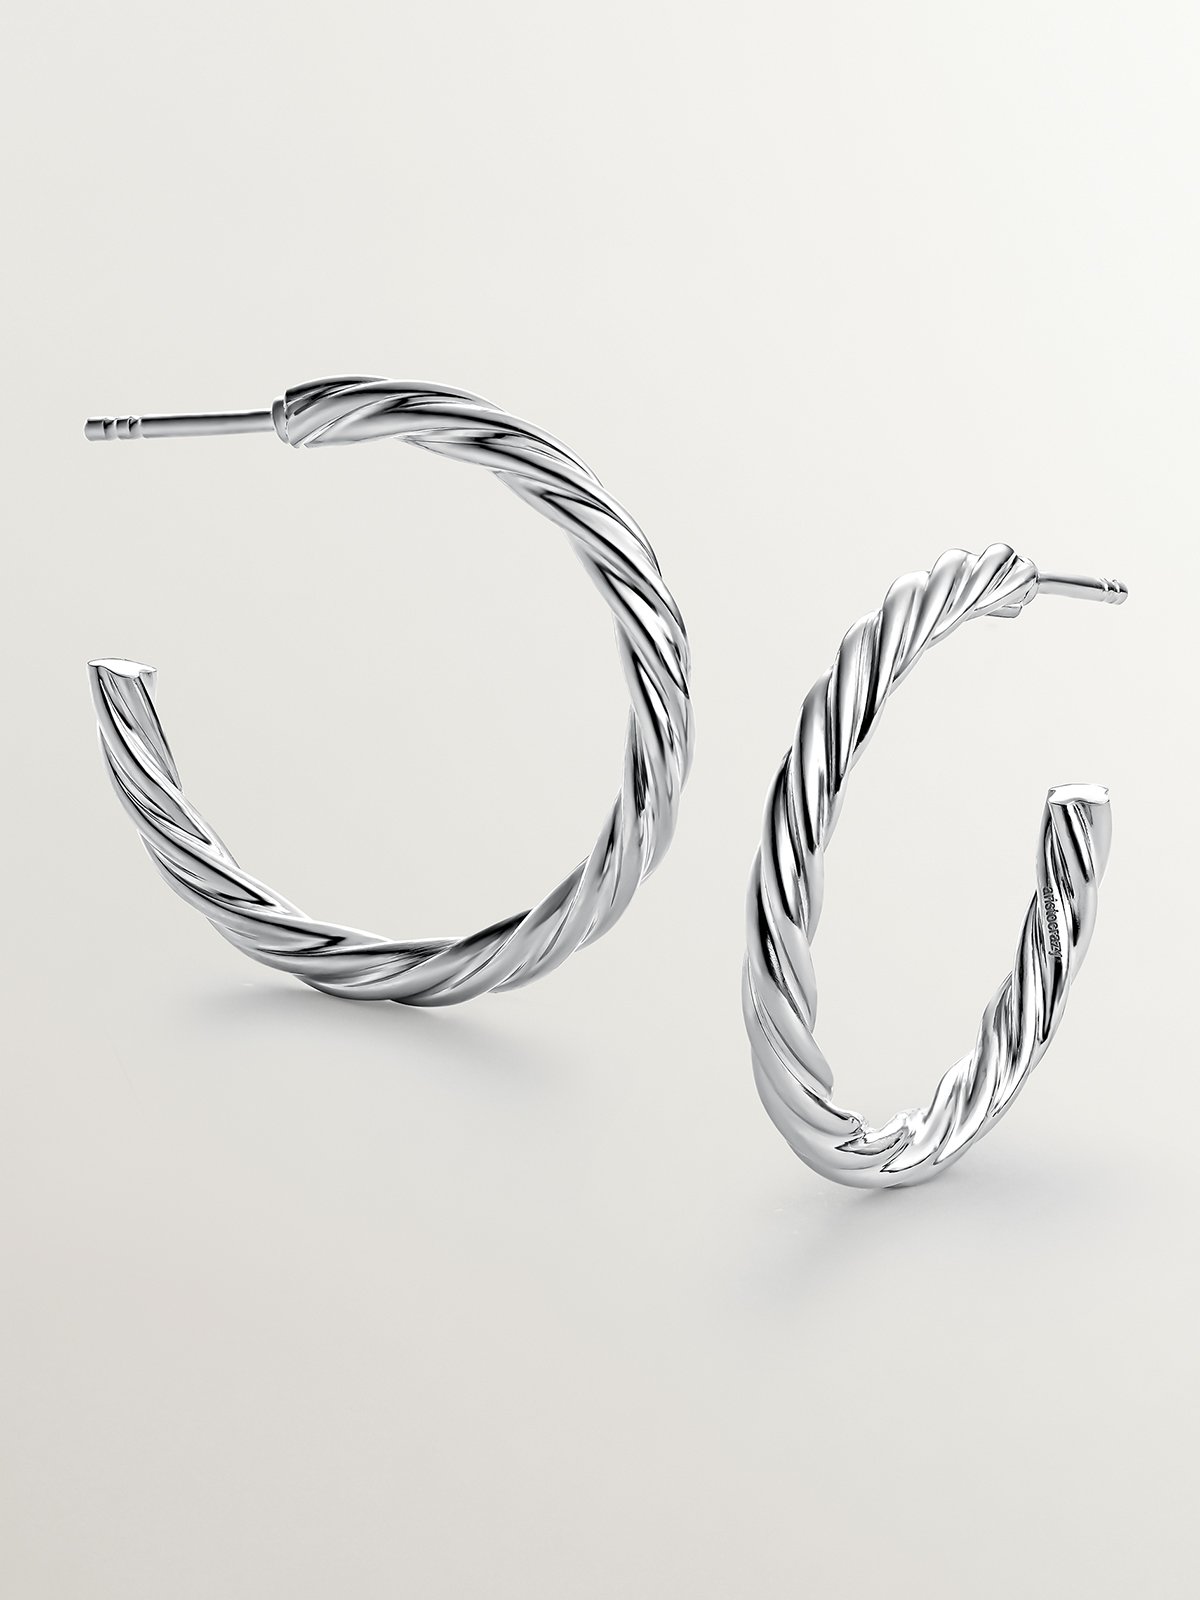 Large 925 sterling silver hoop earrings with fluted texture.